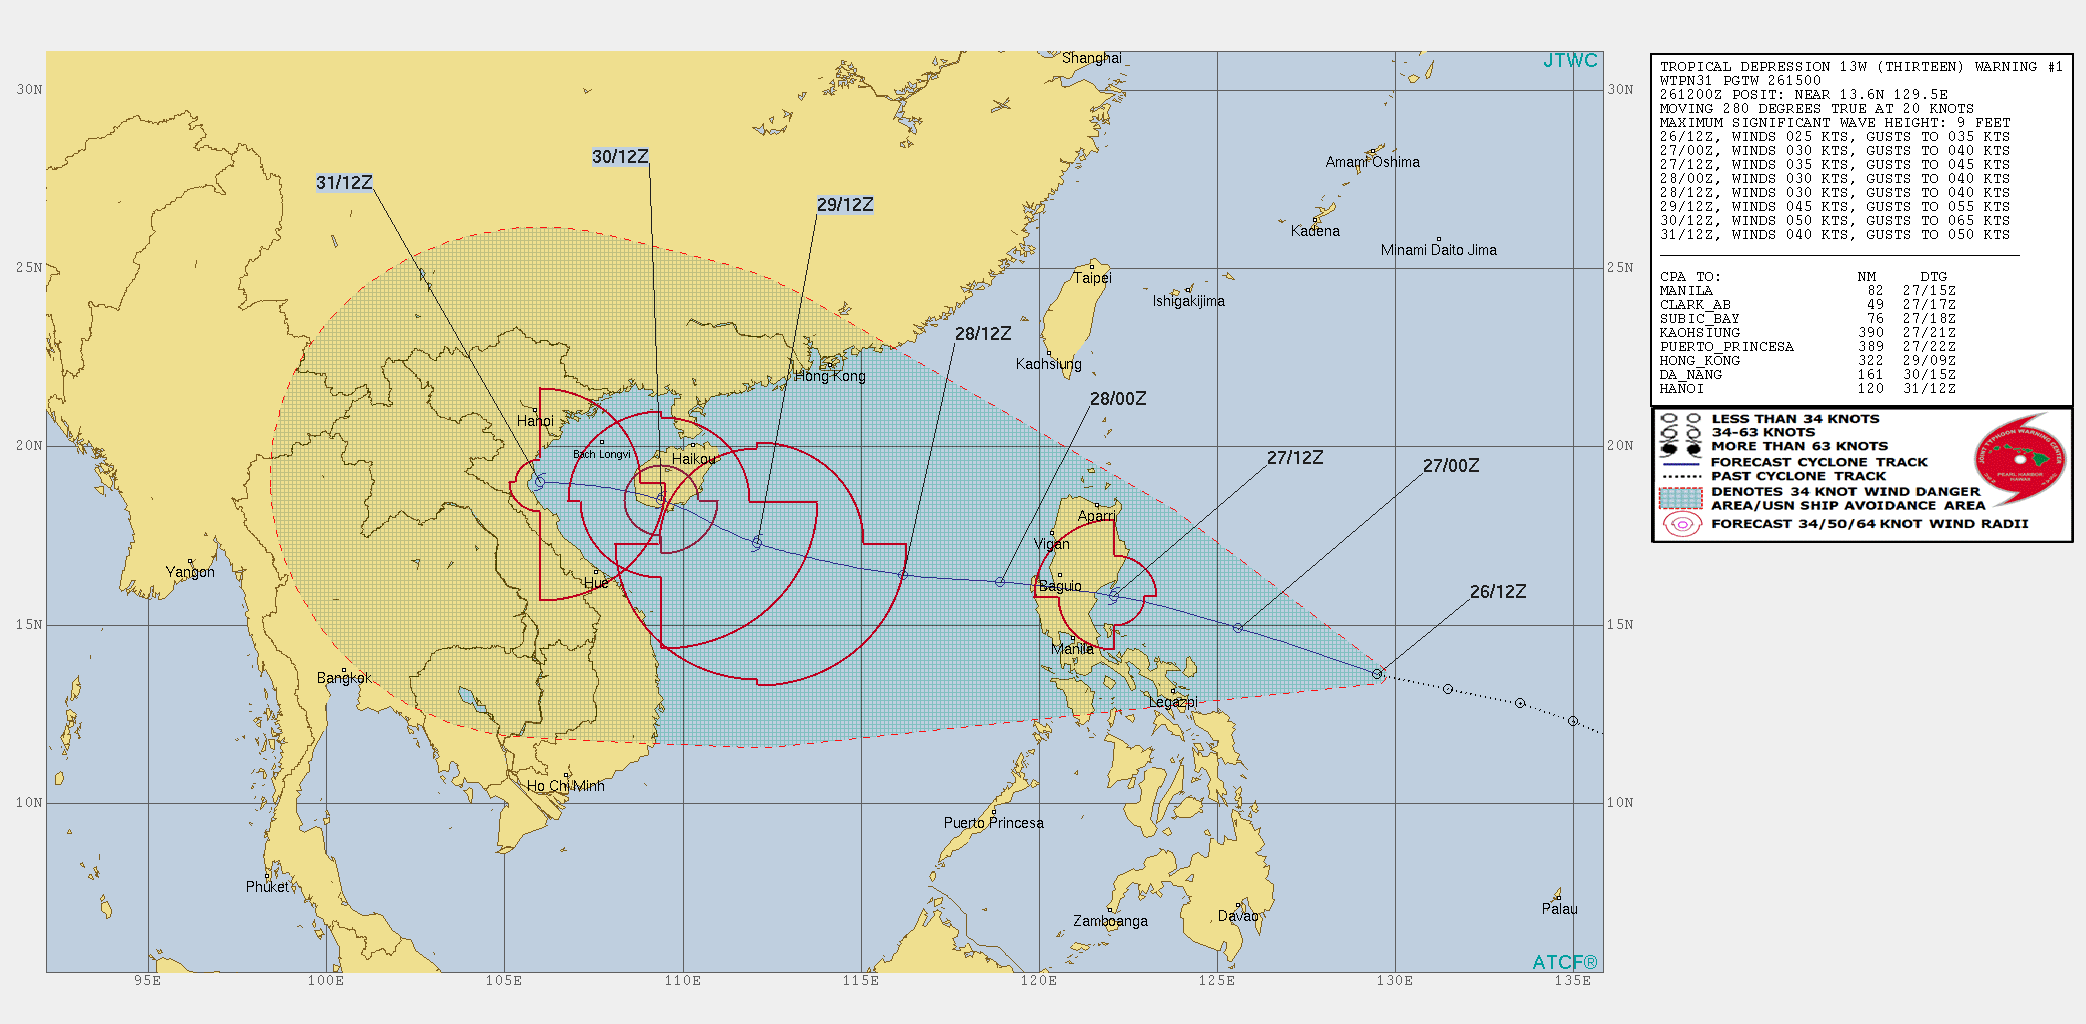 Invest 99W now TD 13W, slowly consolidating and approaching Luzon